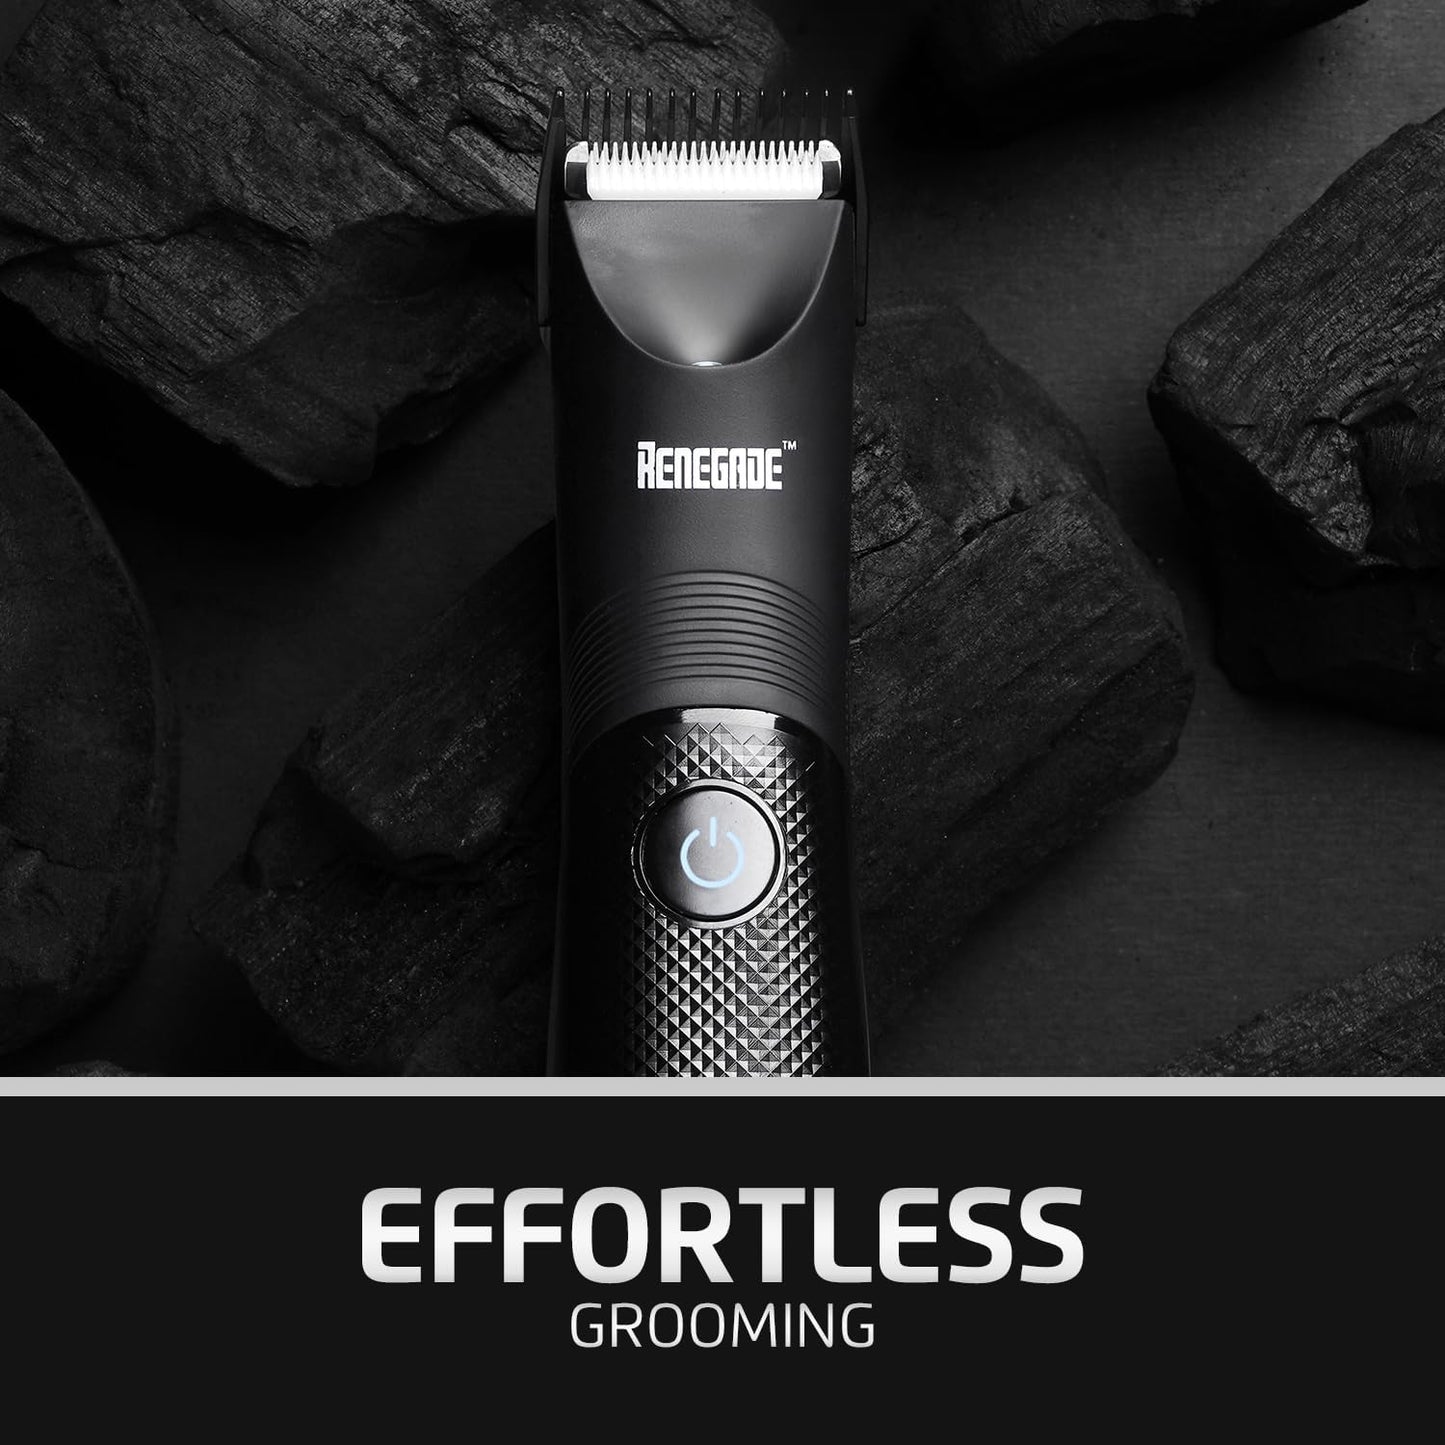 Renegade Ball Trimmer Men, Body Hair Trimmer for Men, Mens Grooming Trimmer, Waterproof Mens Grooming Kit for Manscaping, with LED Light Adjustable Guard, Rechargeable Manscaper